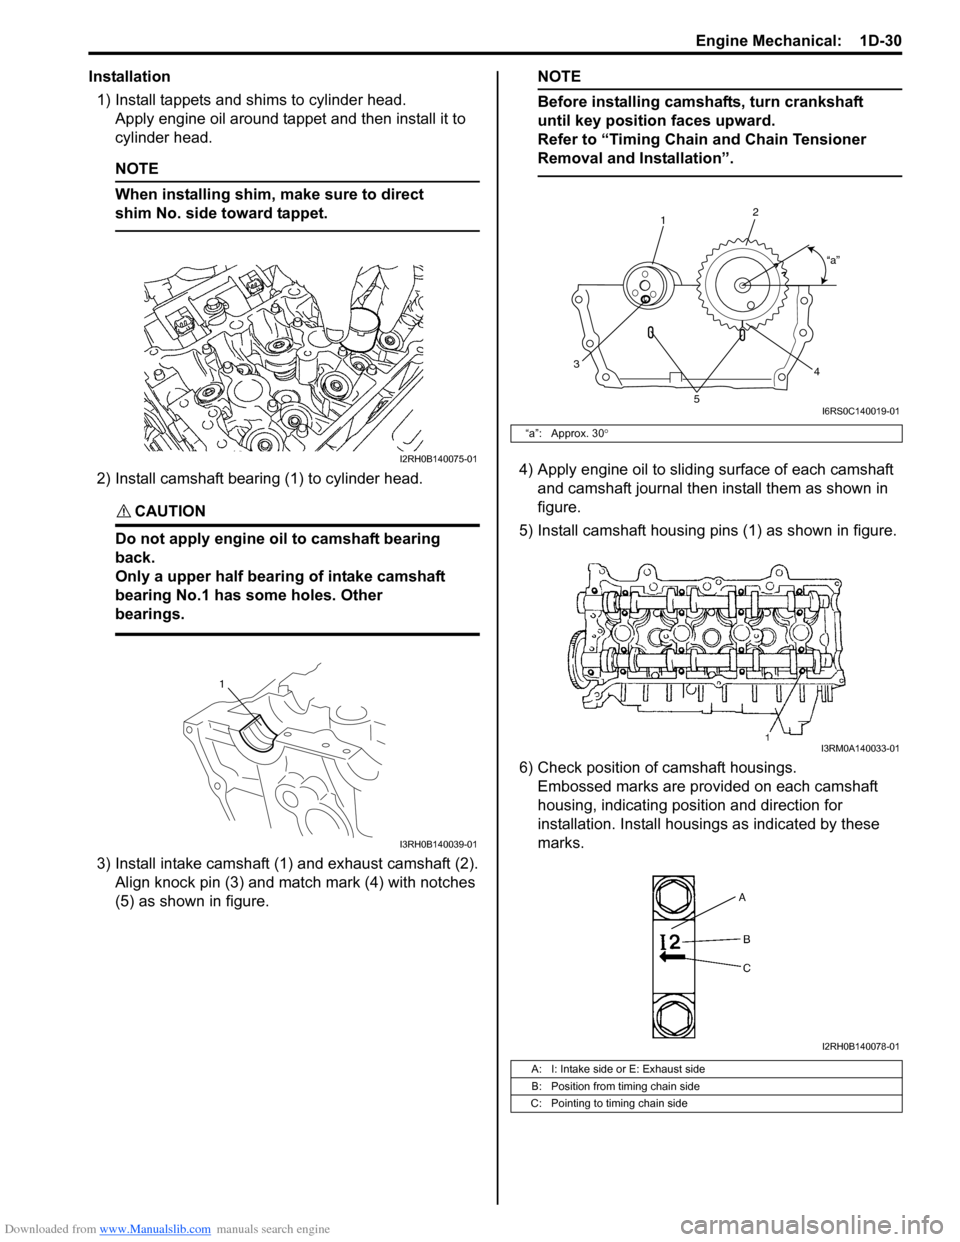 SUZUKI SWIFT 2006 2.G Service Workshop Manual Downloaded from www.Manualslib.com manuals search engine Engine Mechanical:  1D-30
Installation1) Install tappets and shims to cylinder head. Apply engine oil around tappet and then install it to 
cyl